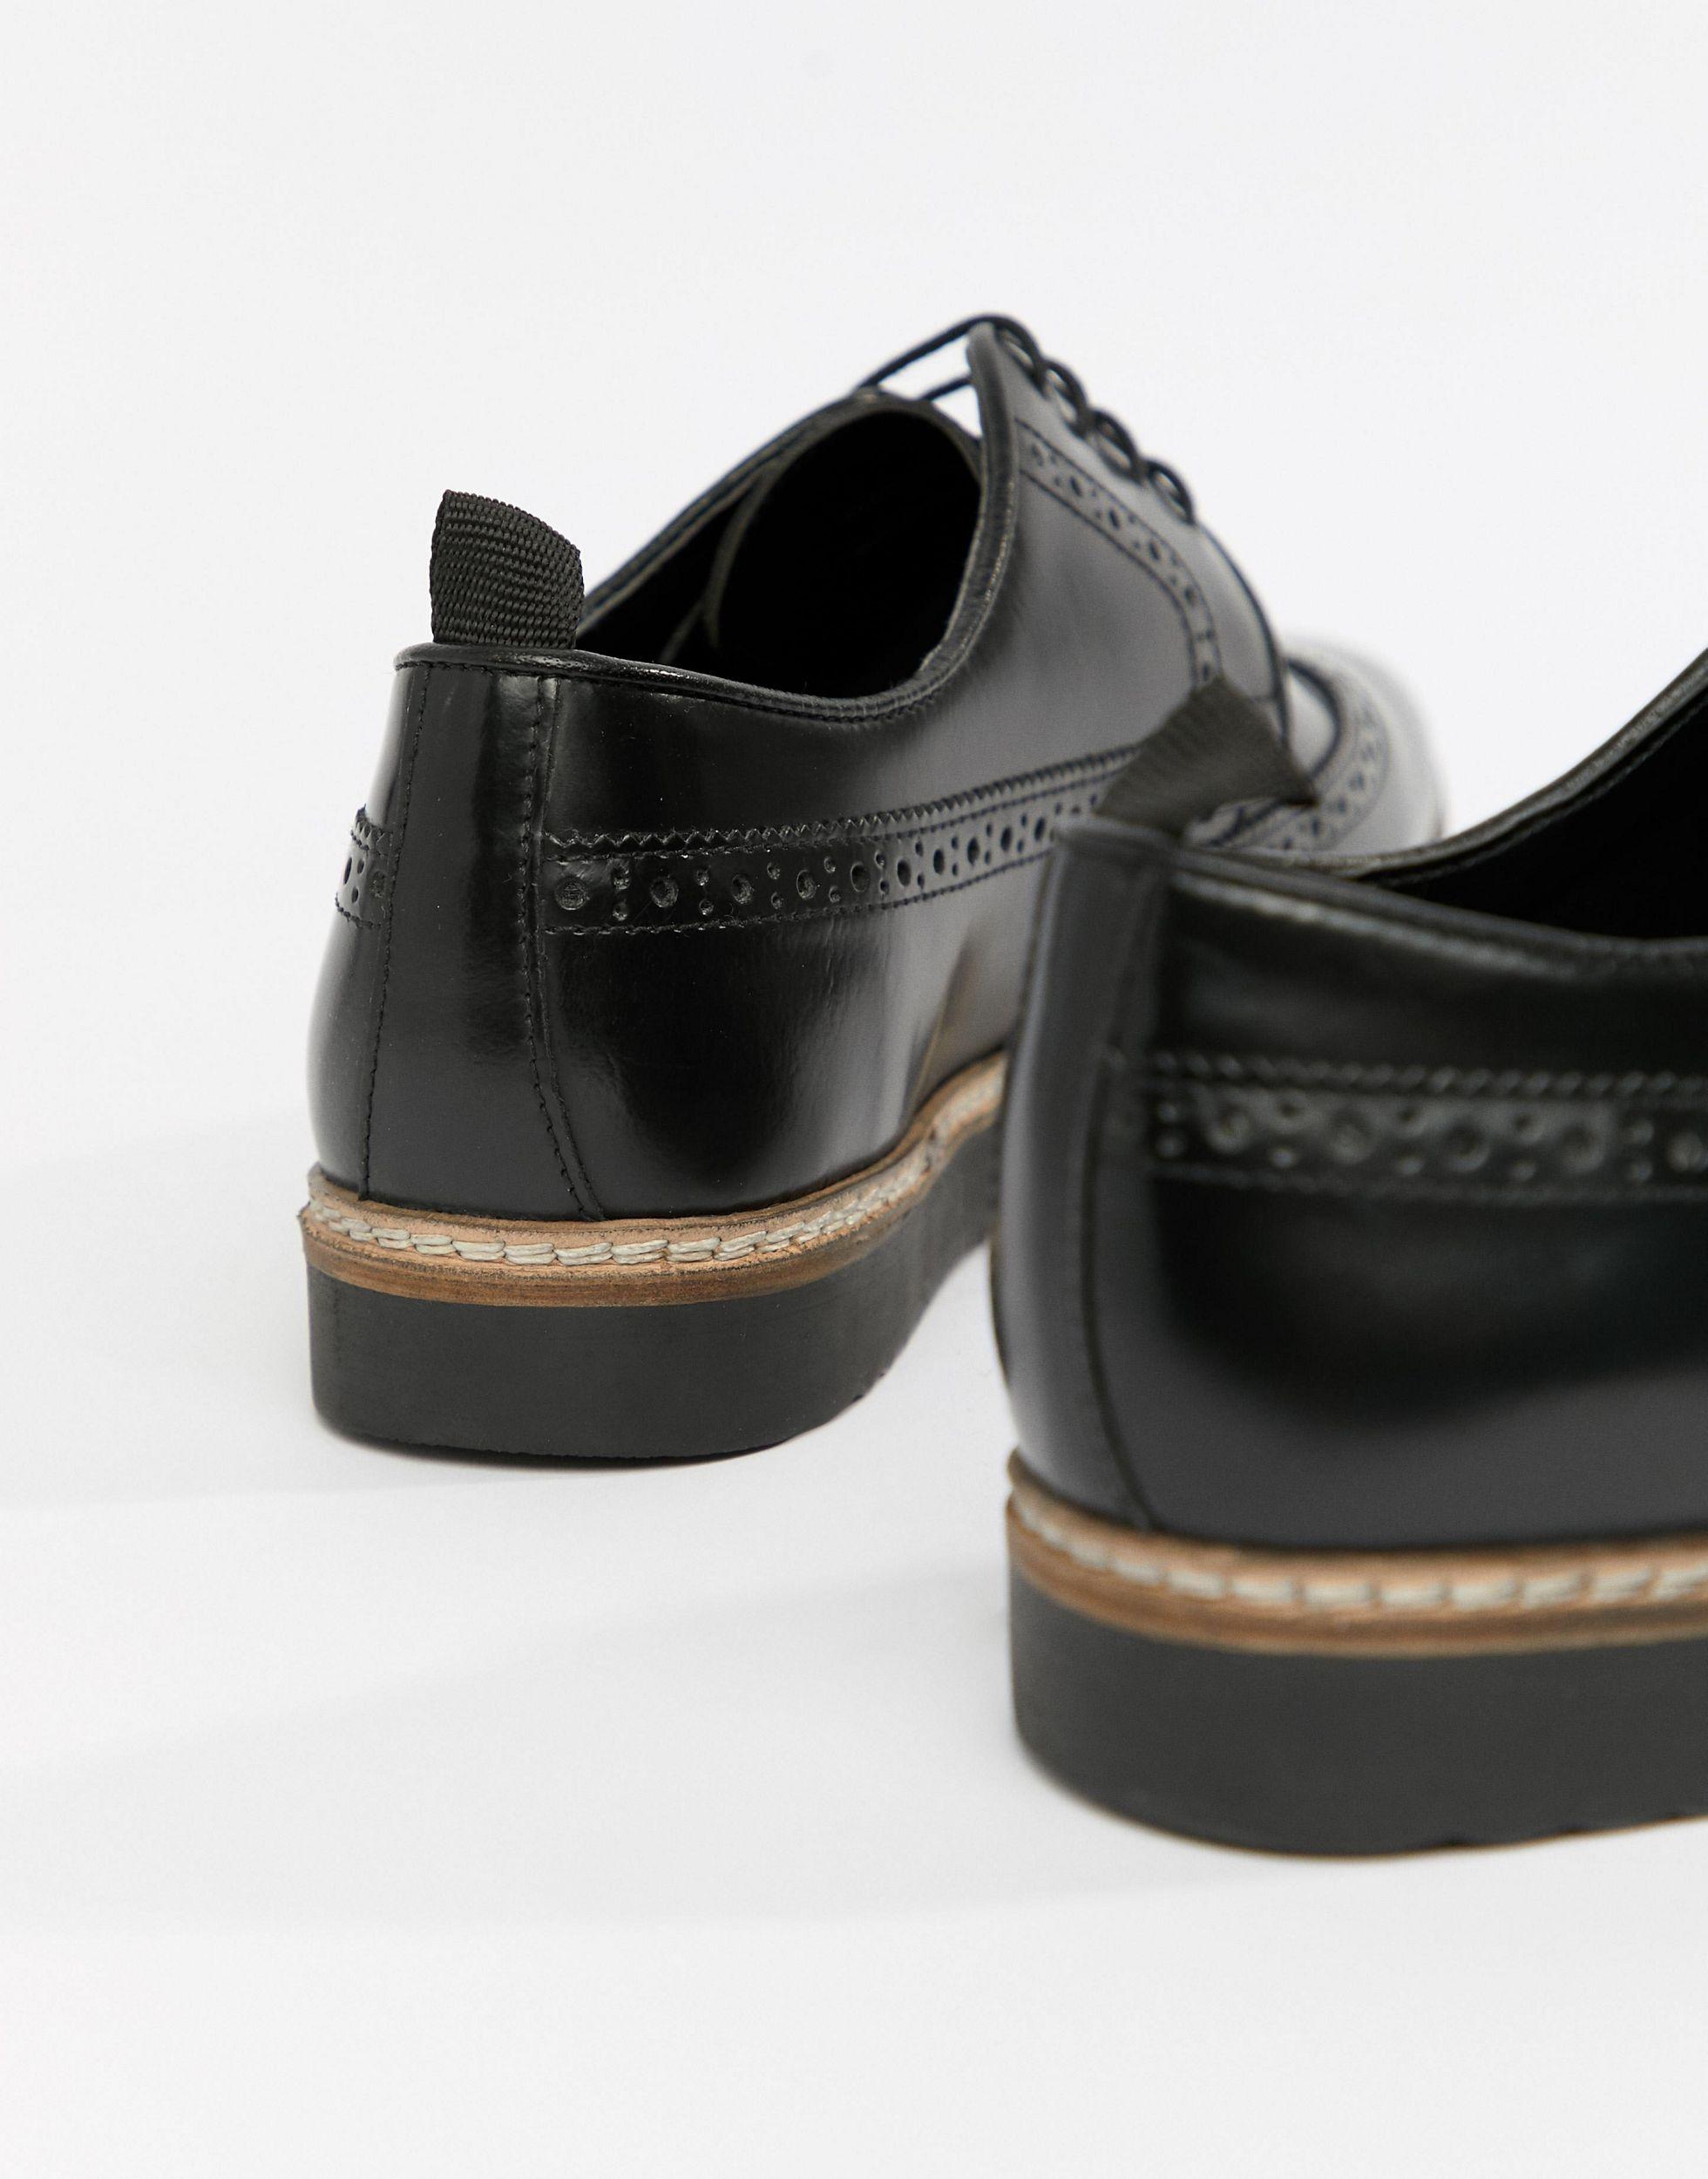 ASOS Leather Brogue Shoes in Black for Men - Lyst